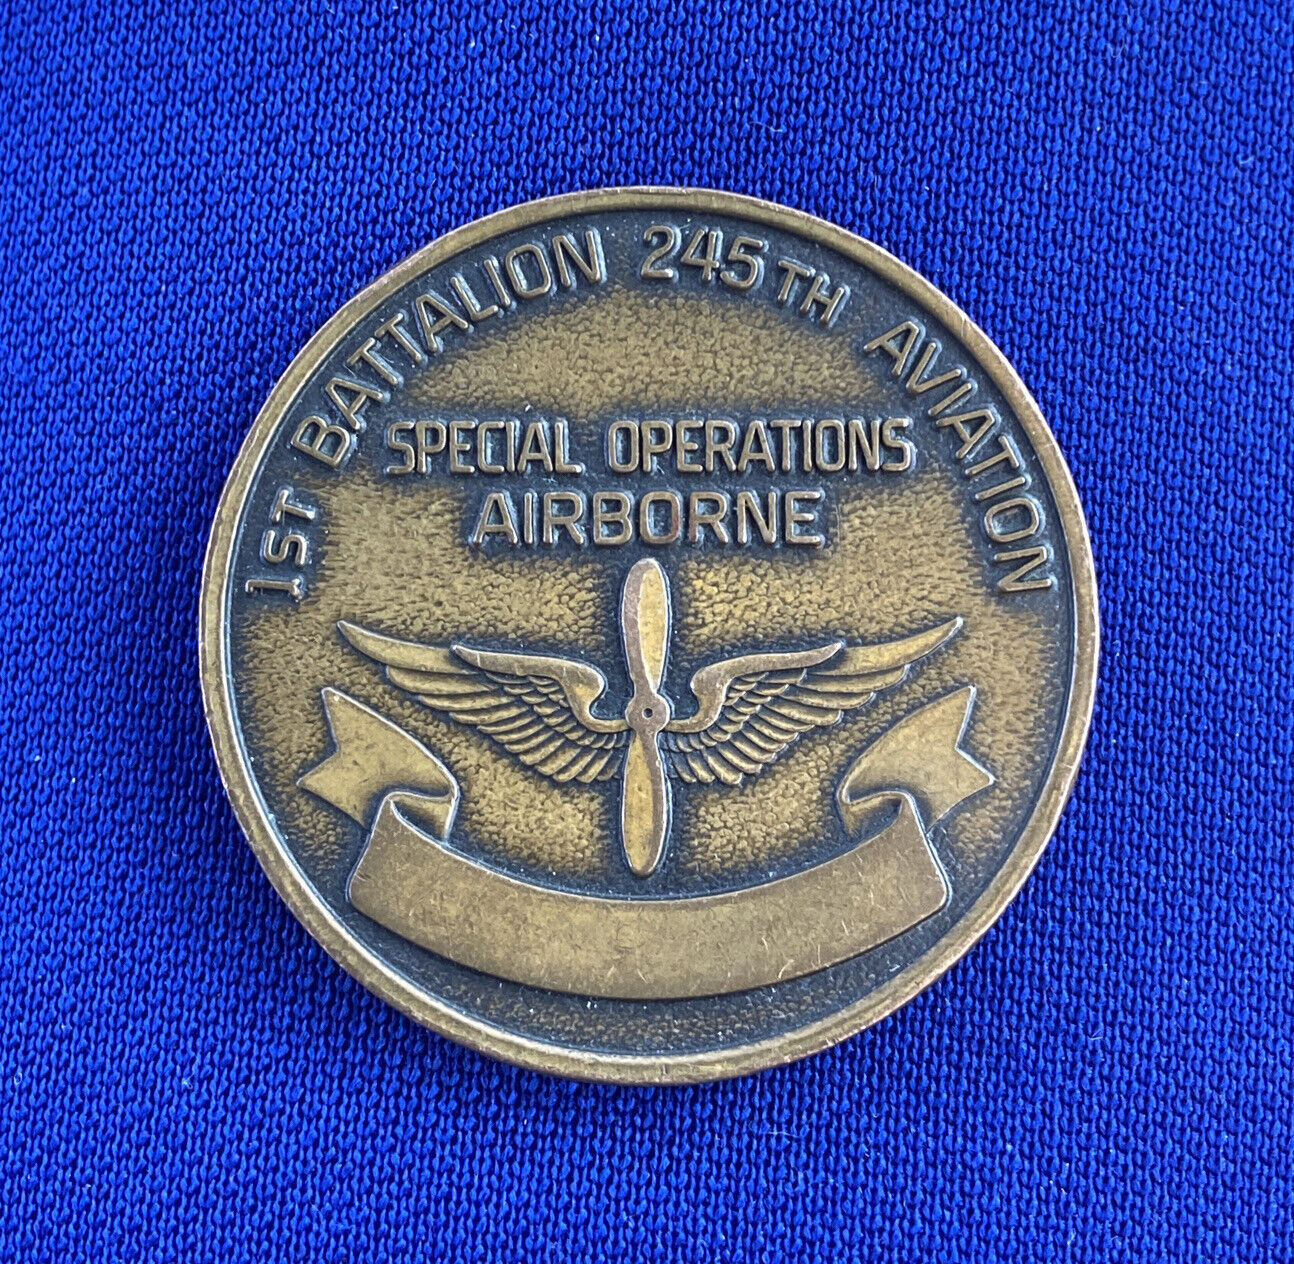 c.1980 DARKNESS Army Special Operations Airborne SOAR 1st BN Challenge Coin VTG